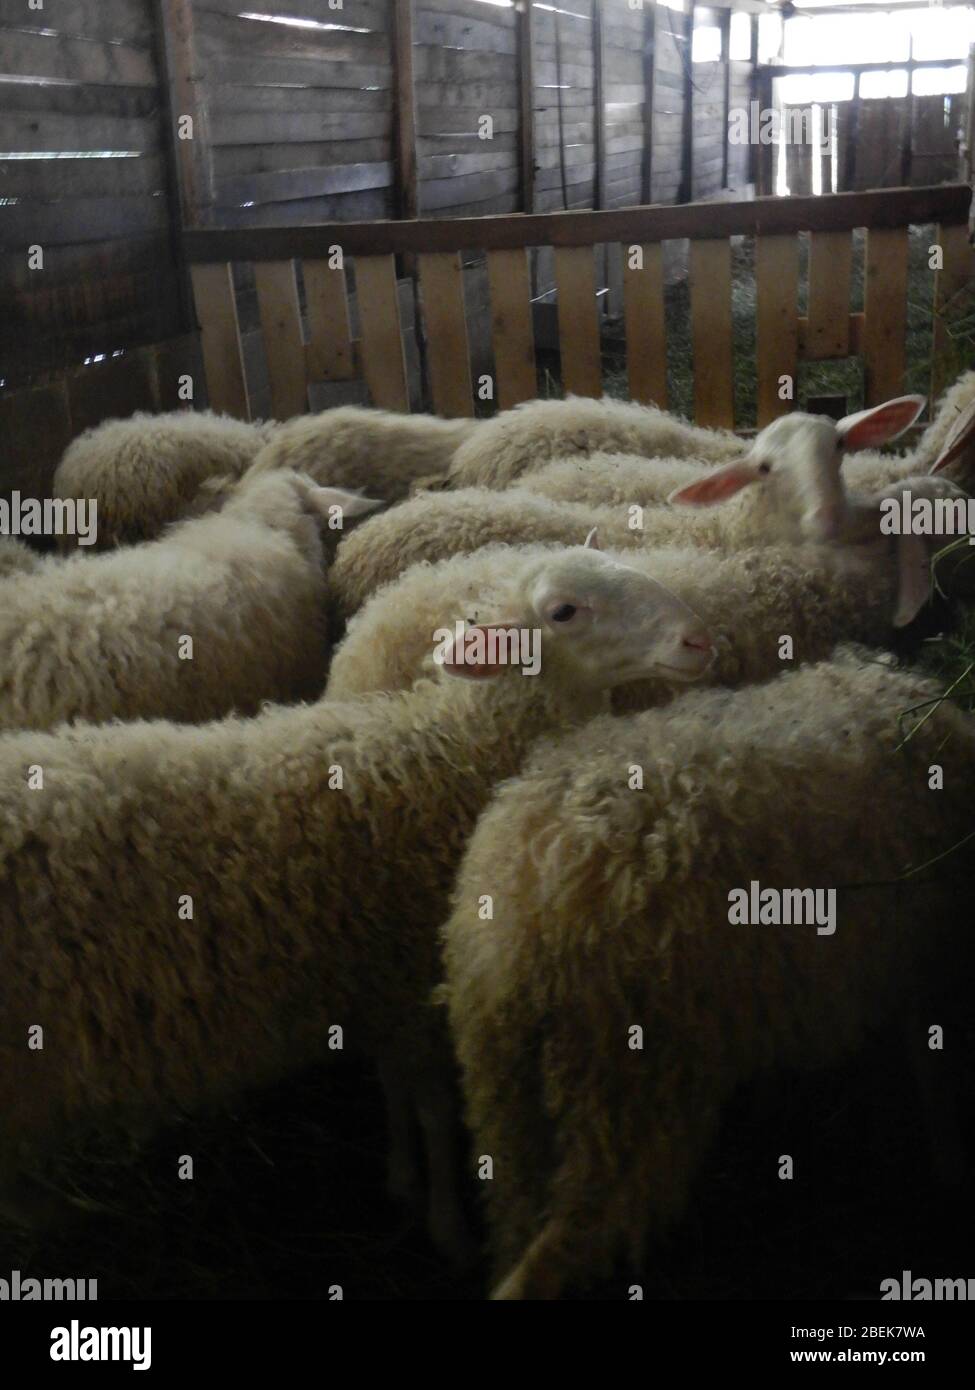 A flock of sheep in a stable Stock Photo